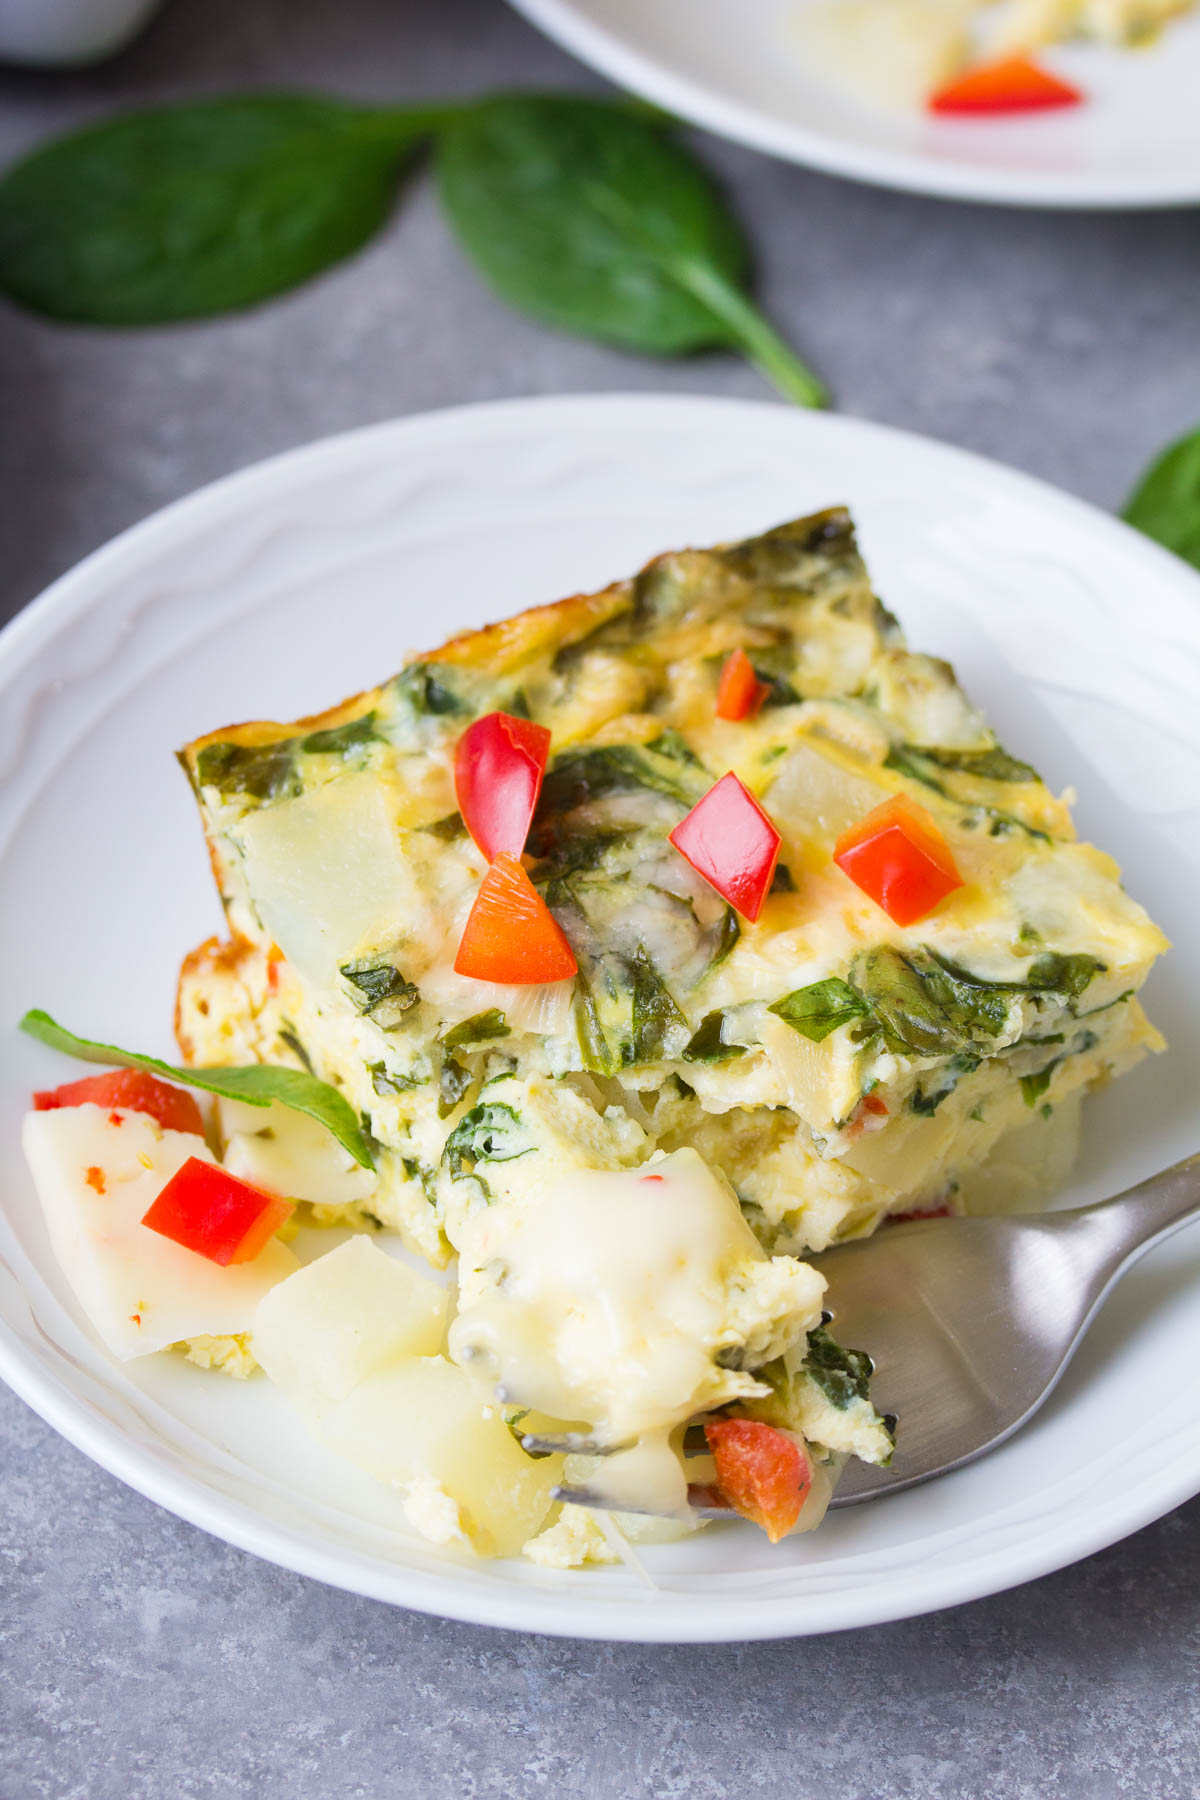 A slice of vegetarian breakfast casserole with a fork.